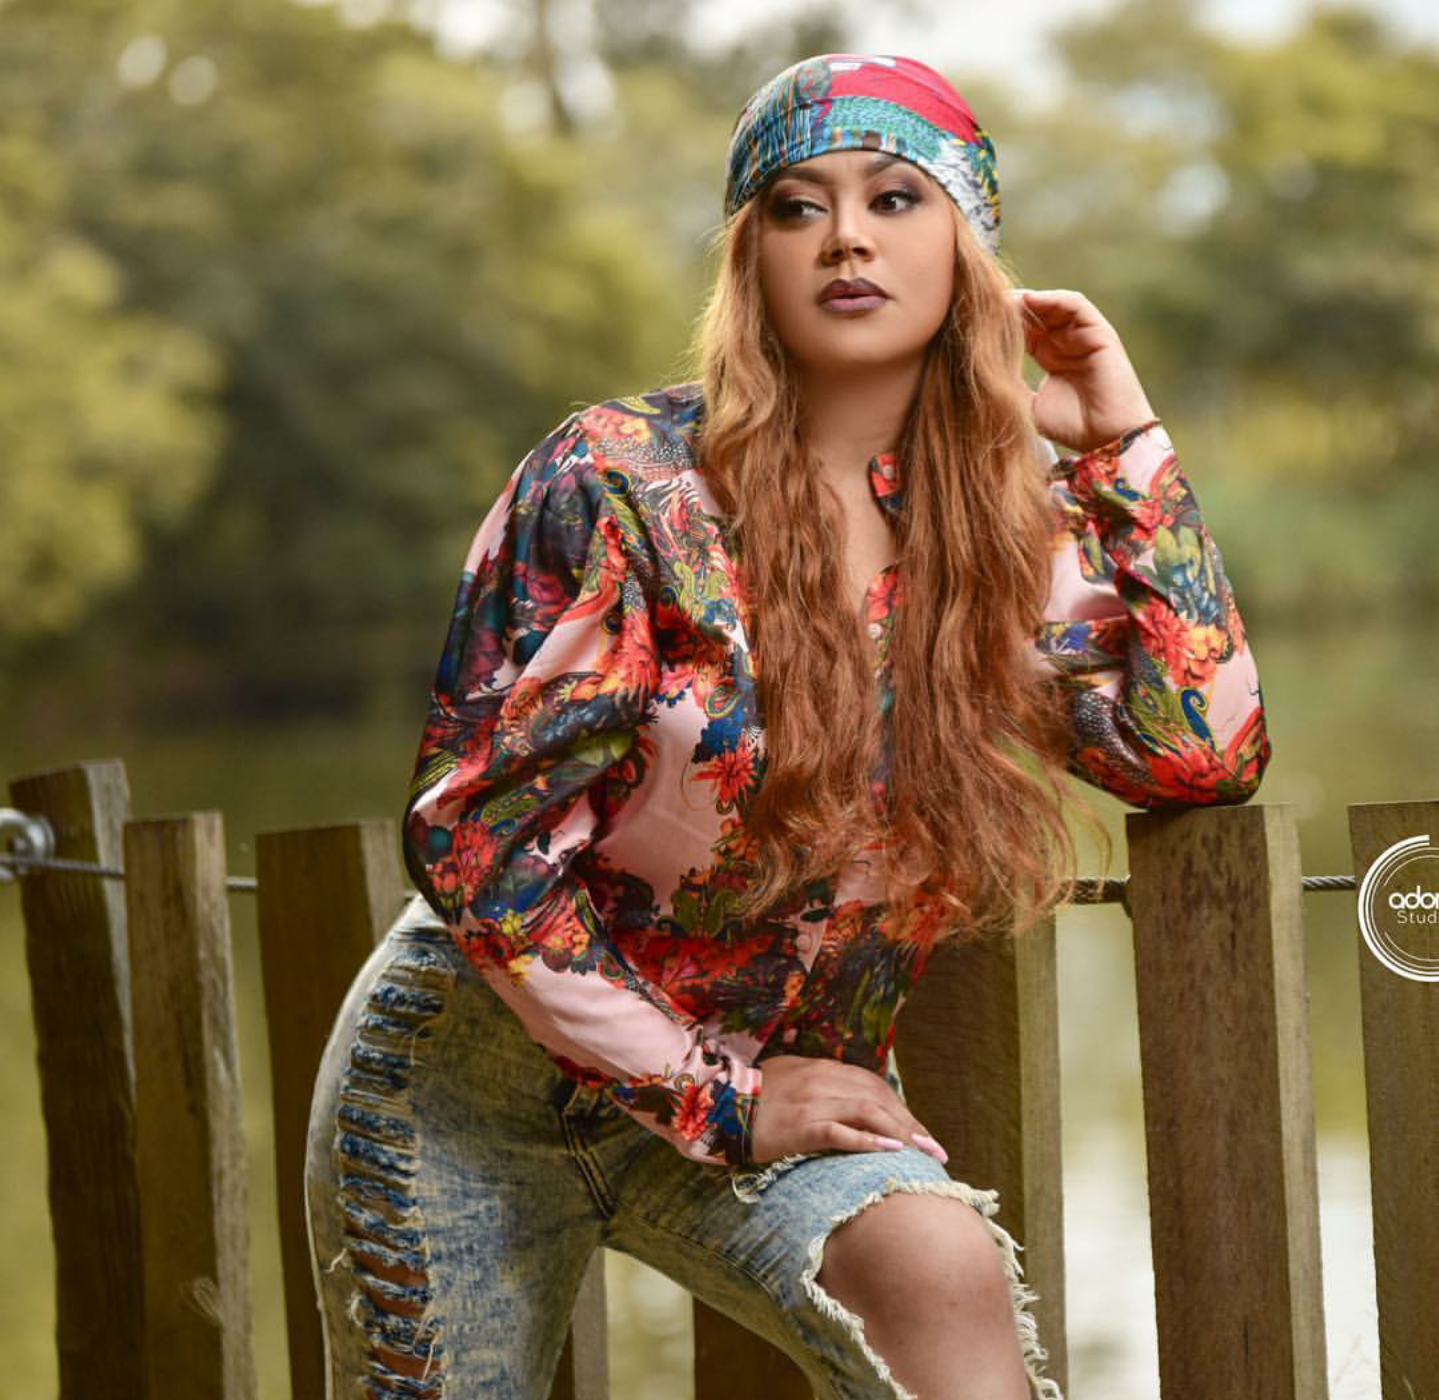 Nadia Buari looked effortlessly gorgeous in this birthday photo shoot